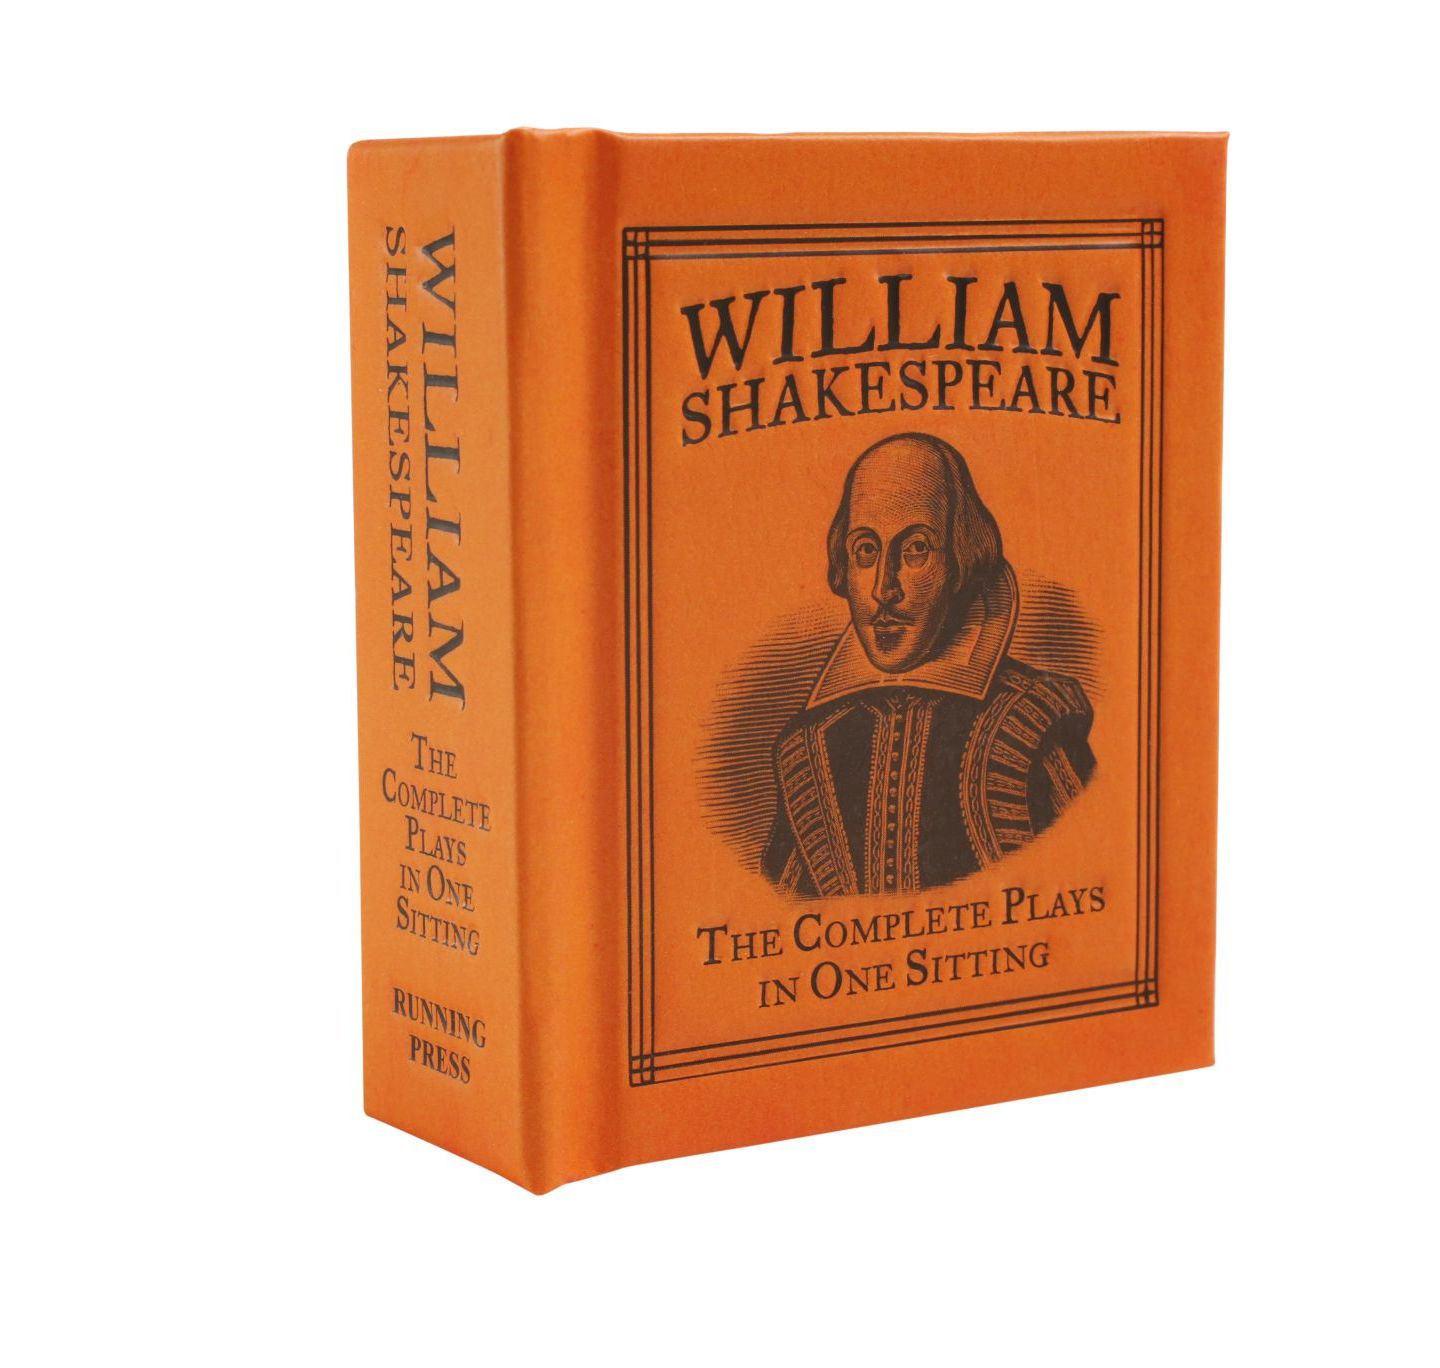 William Shakespeare: Complete Plays in One Sitting HB